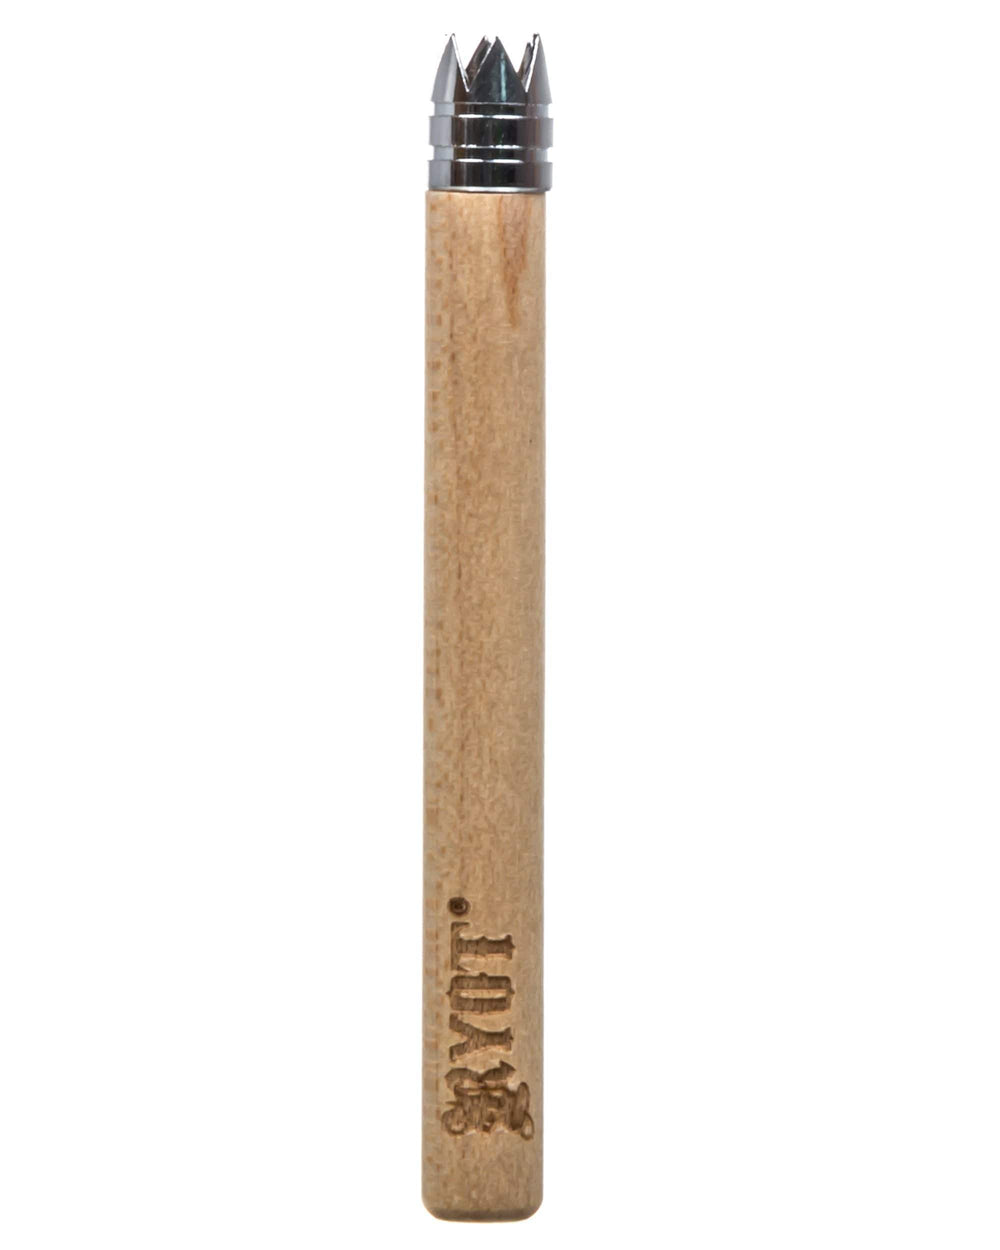 RYOT RYOT Wooden One Hitter w/ Digger Tip Bamboo RYOT Wooden One Hitter w/ Digger Tip-Steinbach Vape